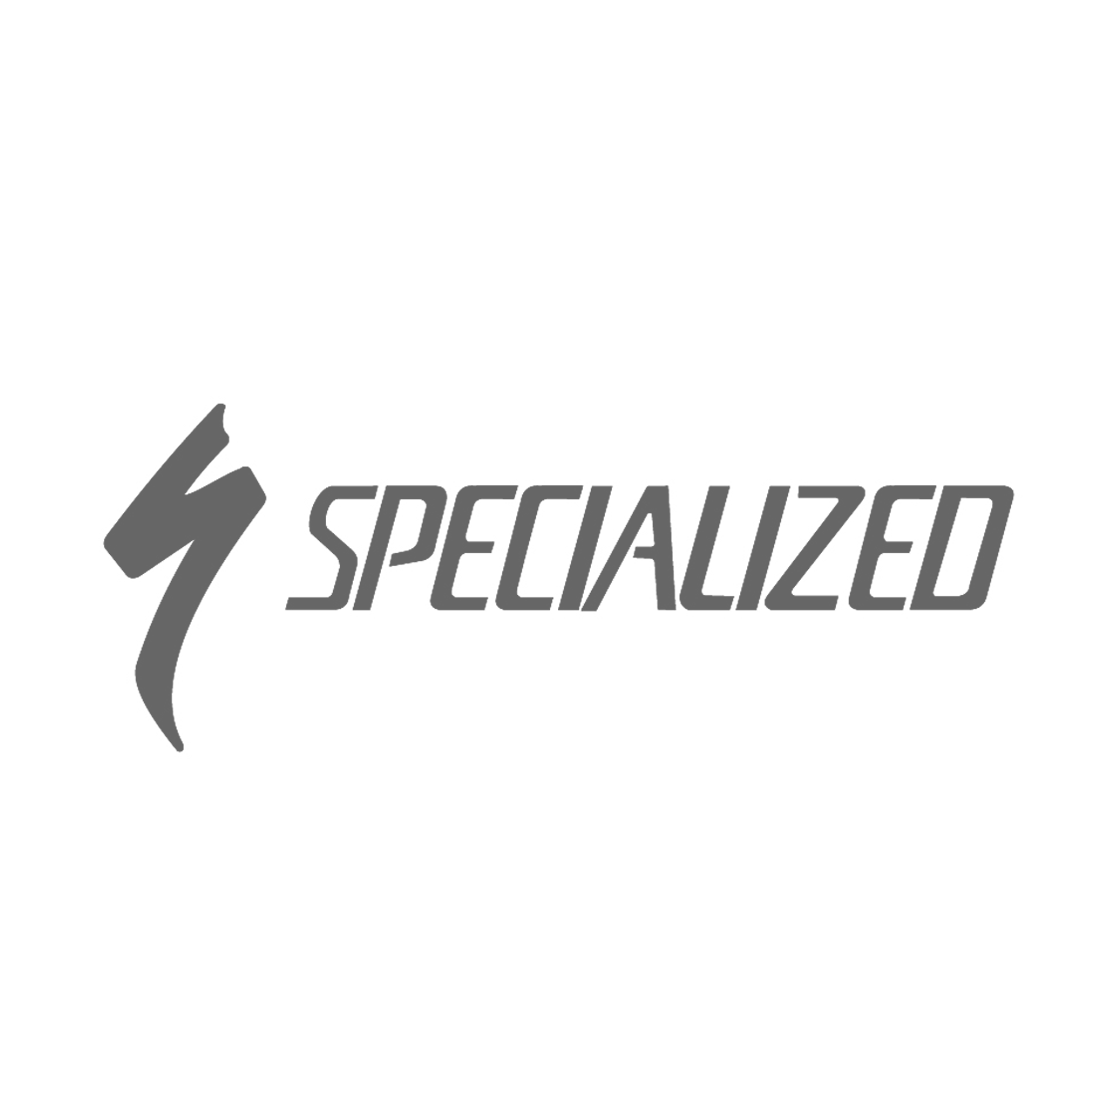 Specialized.png